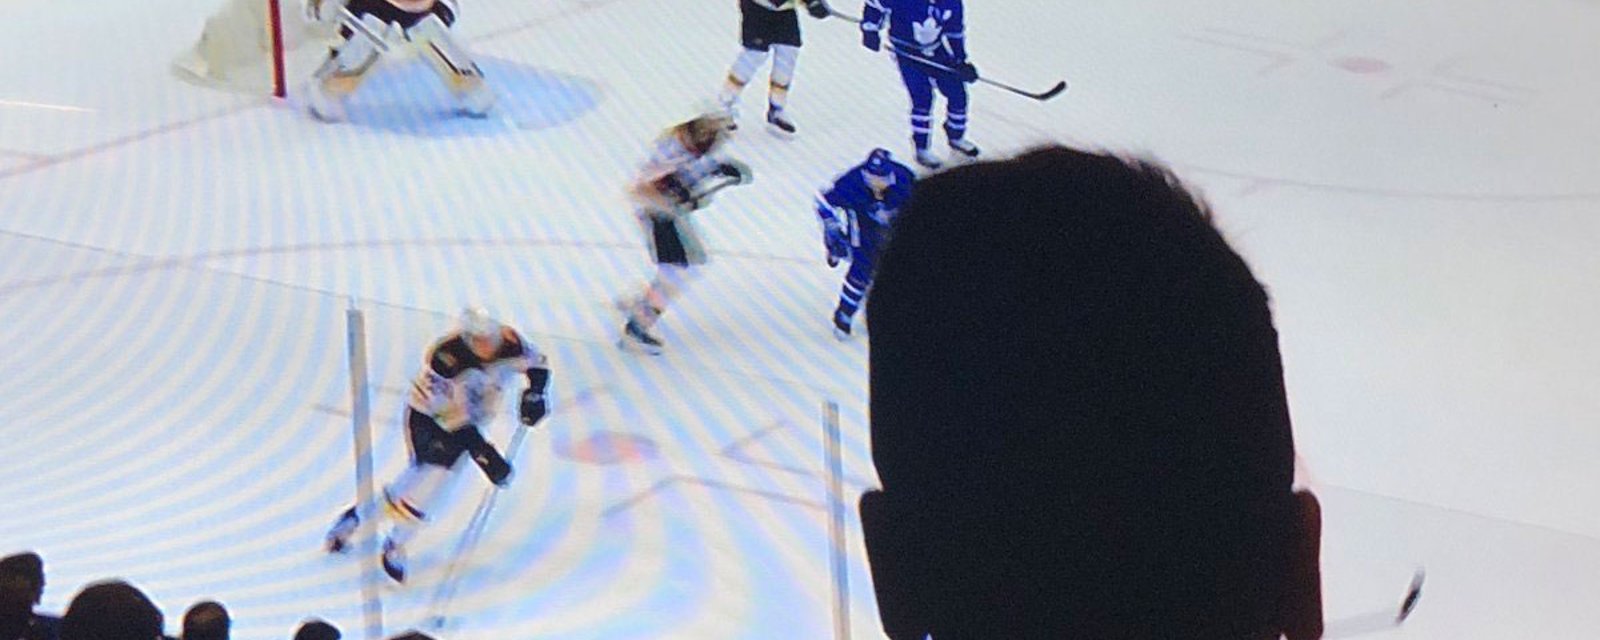 NBC in hot water as Bruins fans harass Leafs fan for his “abnormally large head”